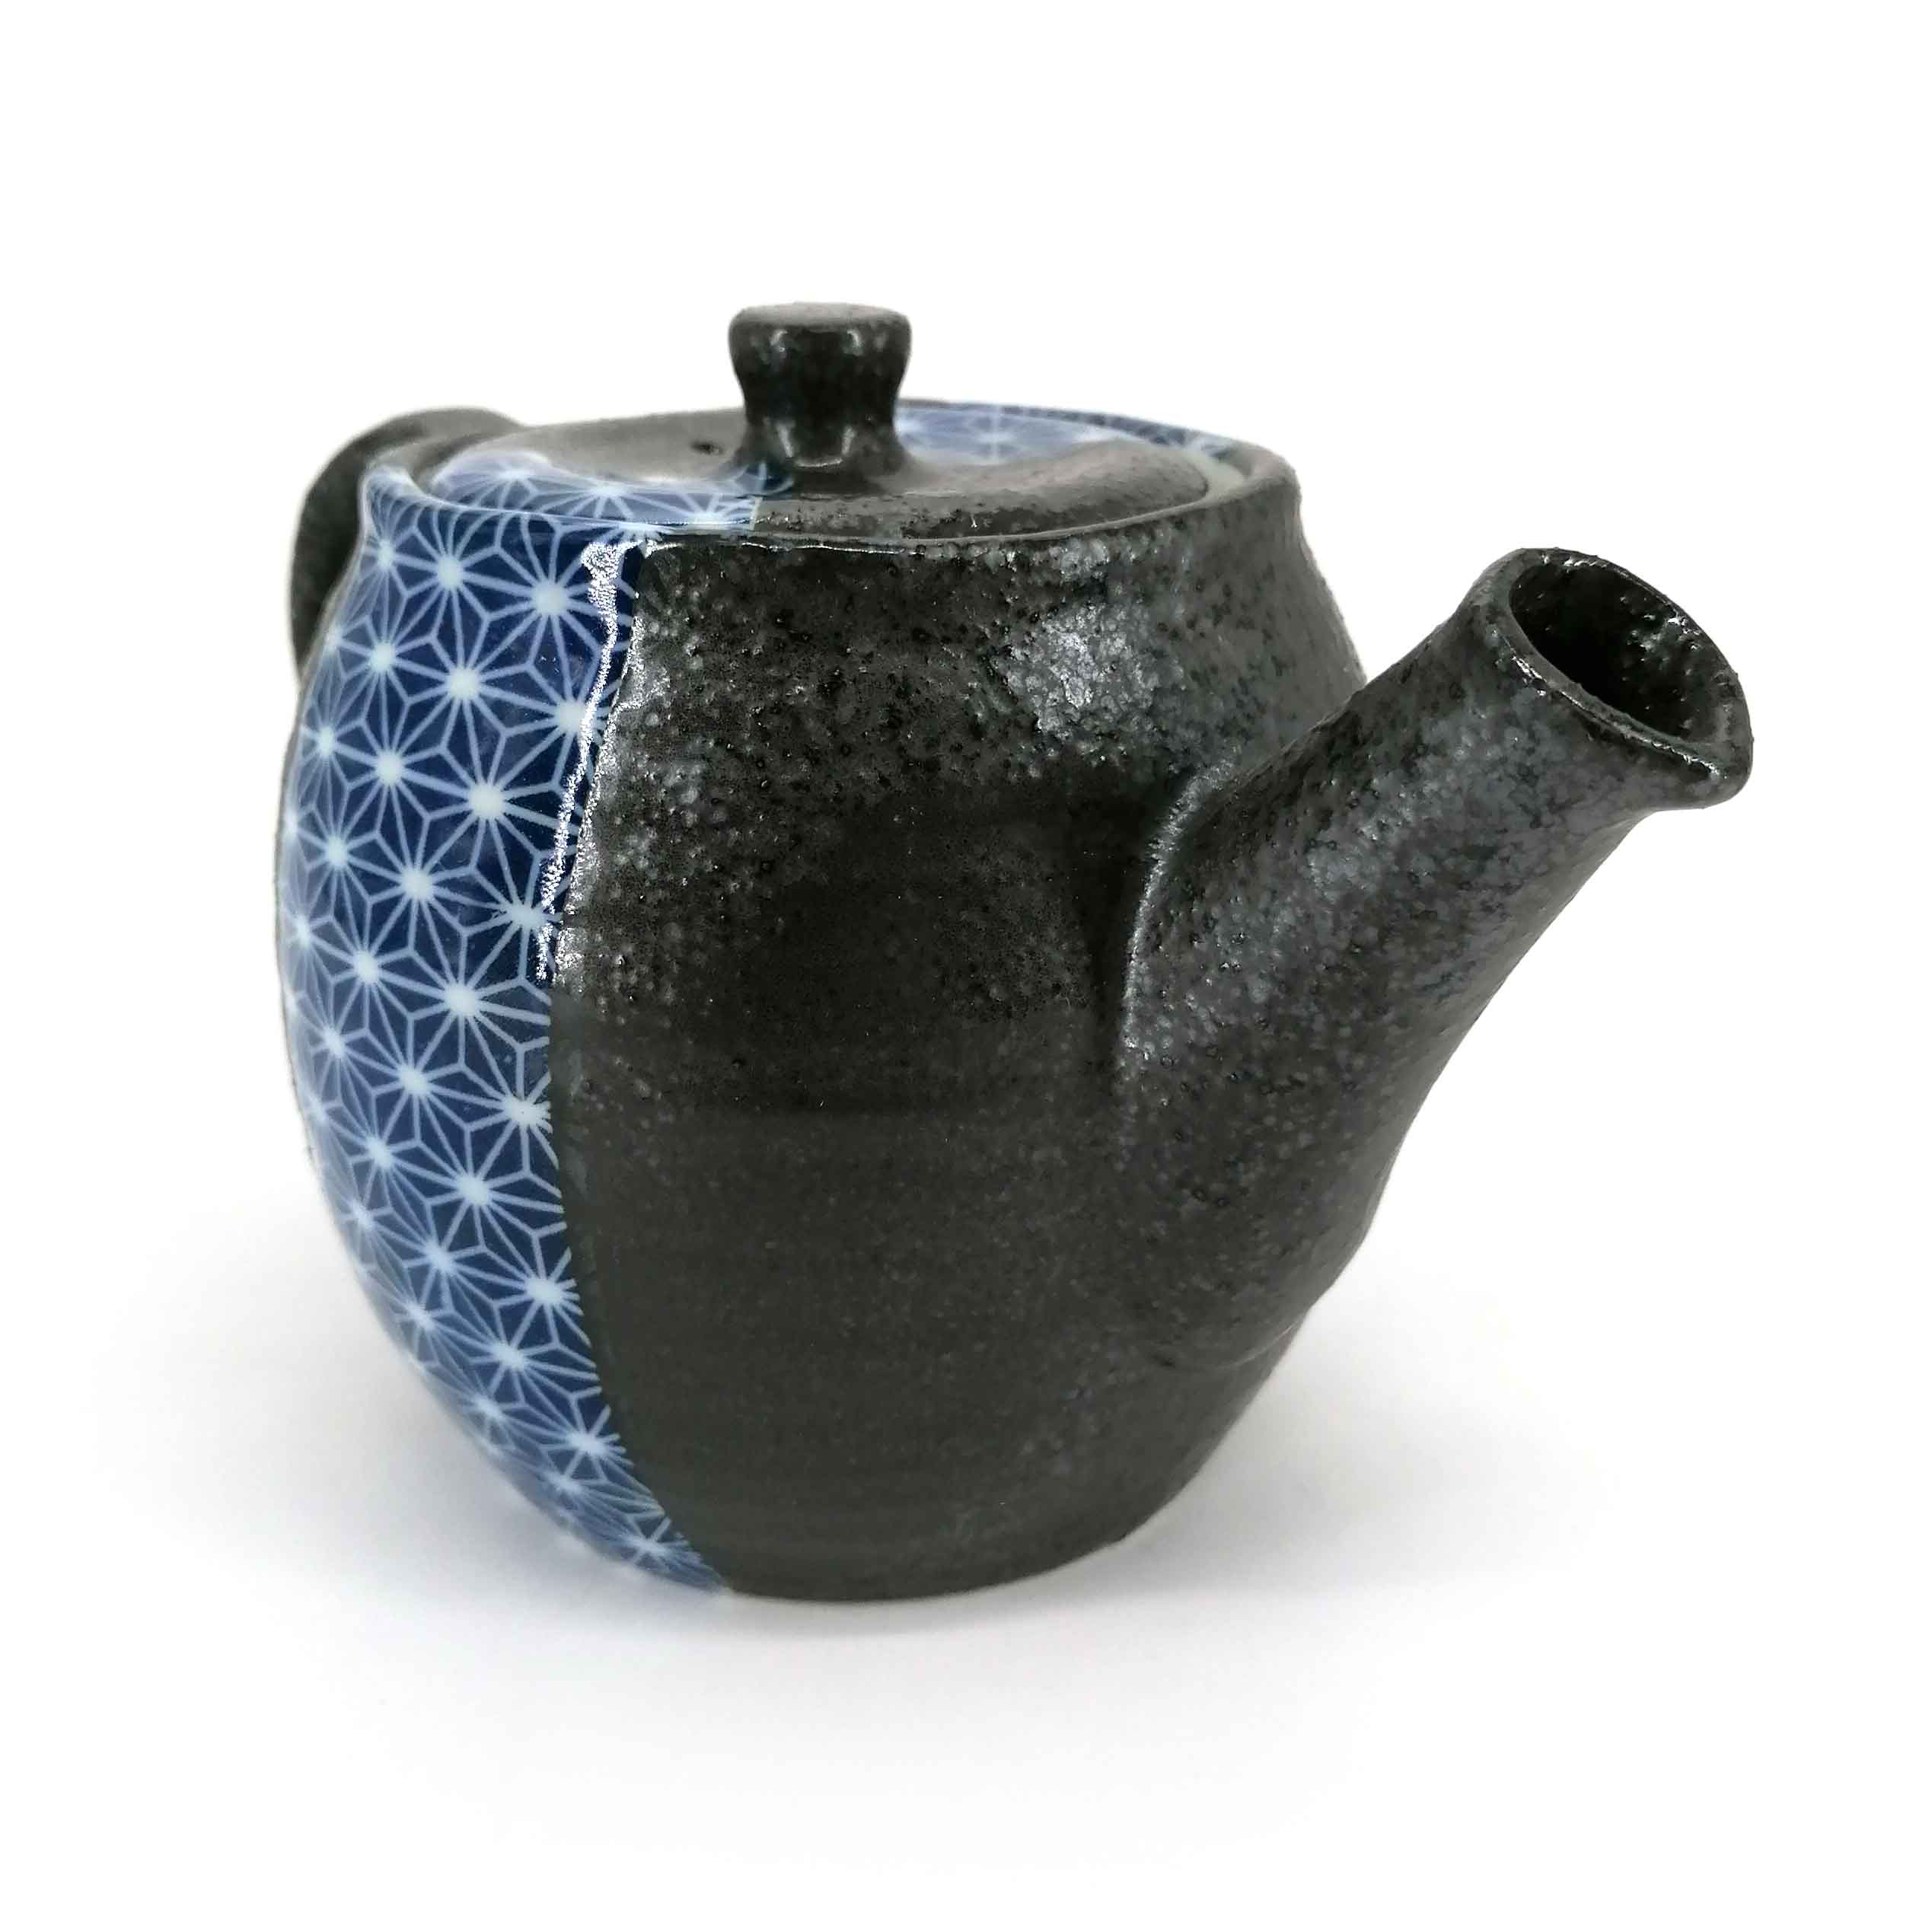 https://tokyo-market.fr/58280/japanese-ceramic-teapot-with-removable-filter-black-with-blue-and-white-patterns-asanoha.jpg